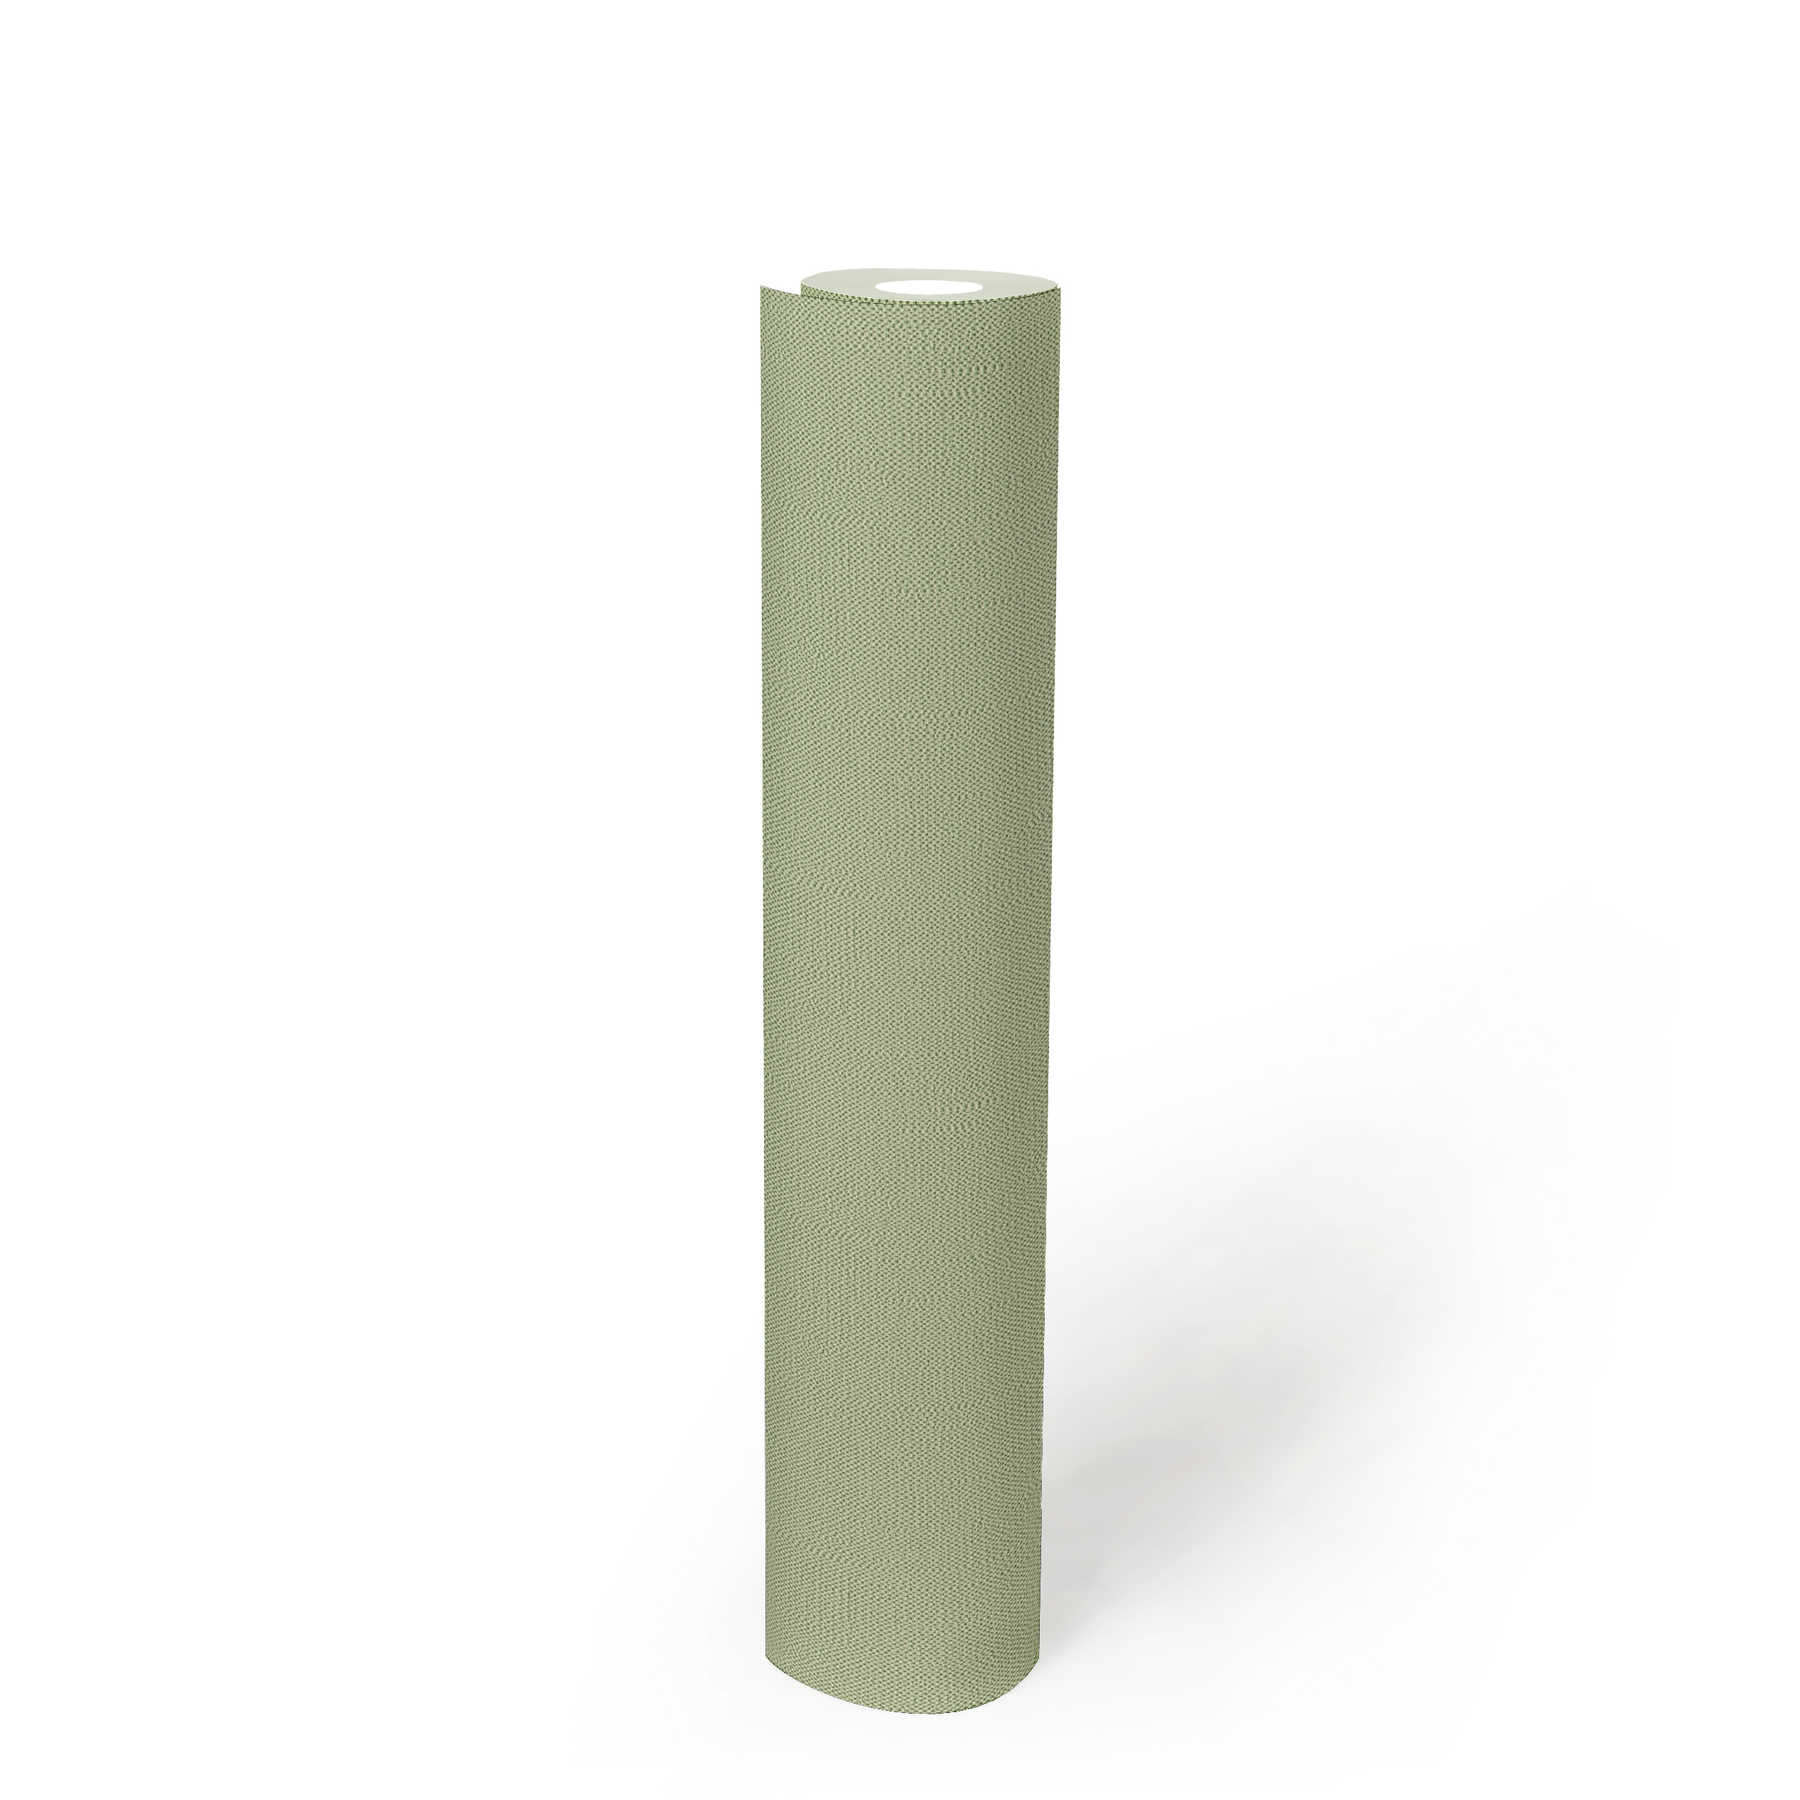             Non-woven wallpaper mint green with foam structure in linen look
        